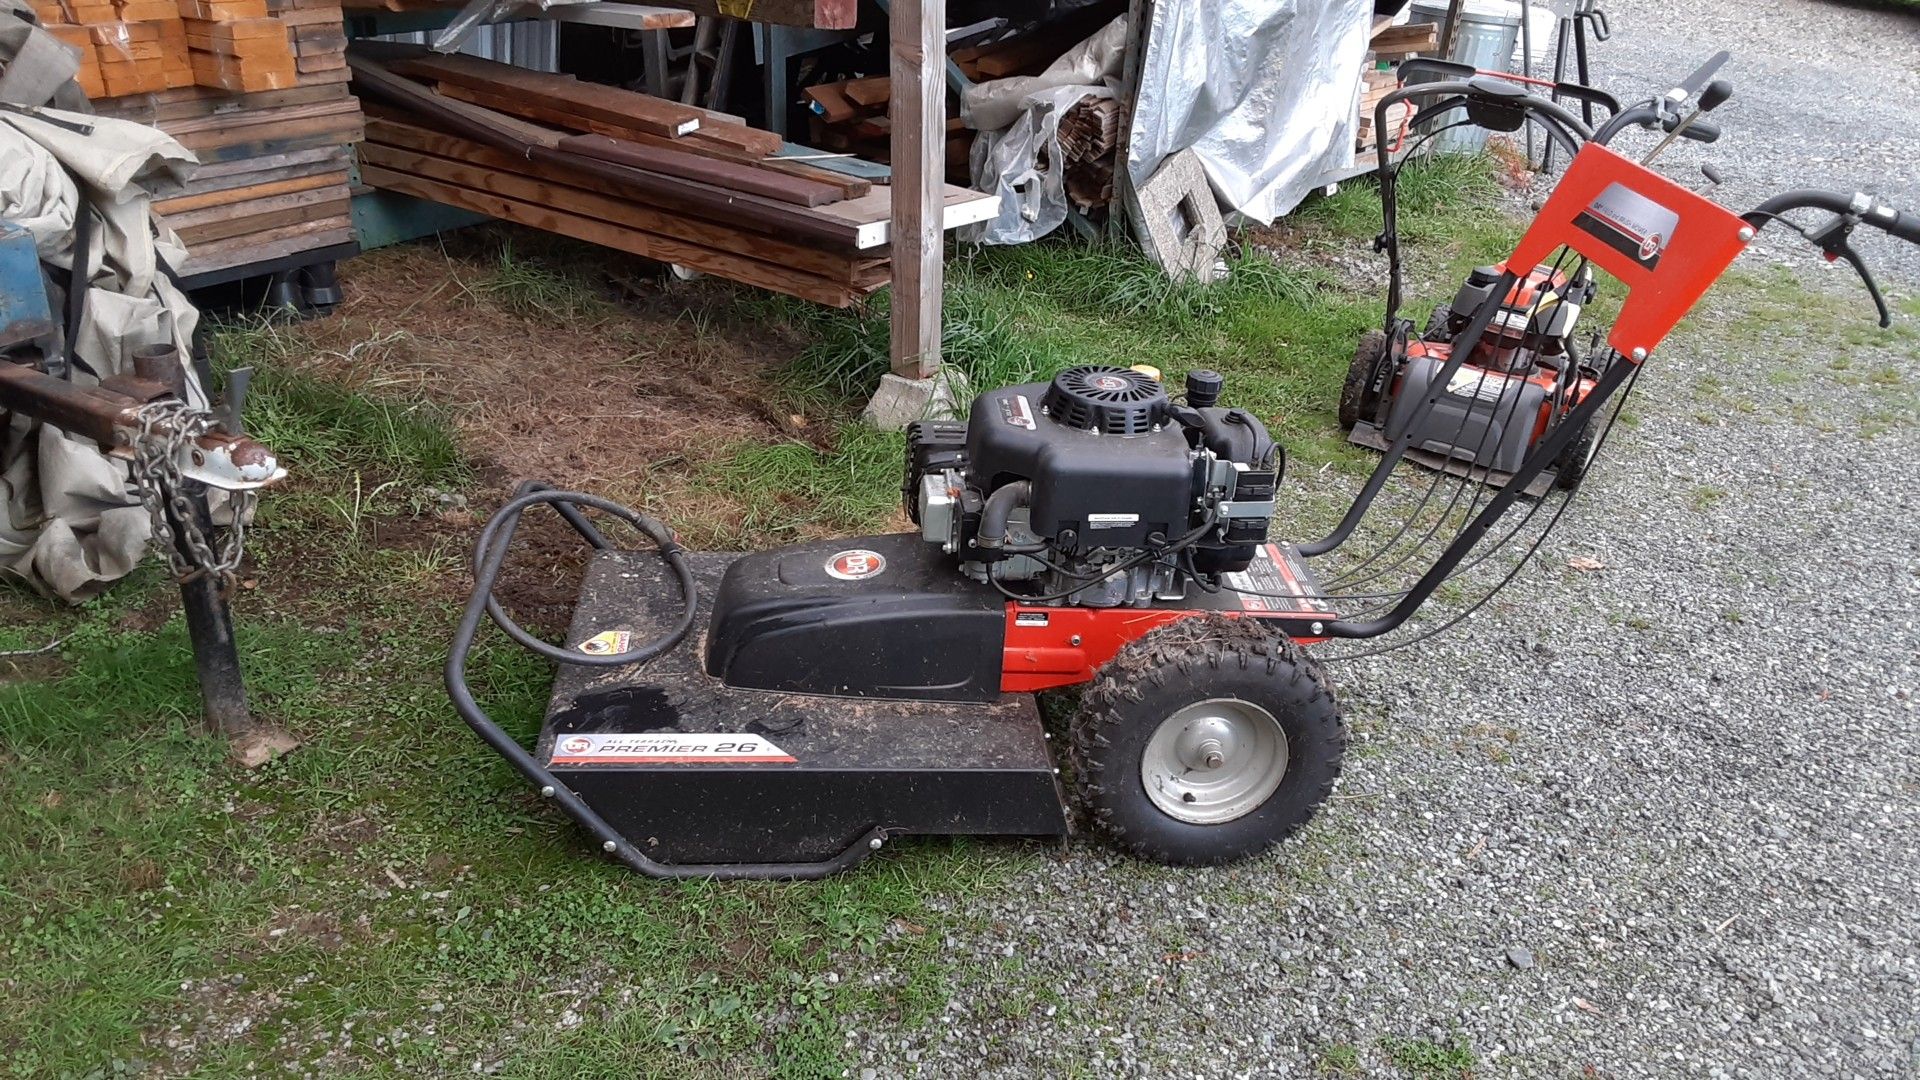 Dr field and brush mower